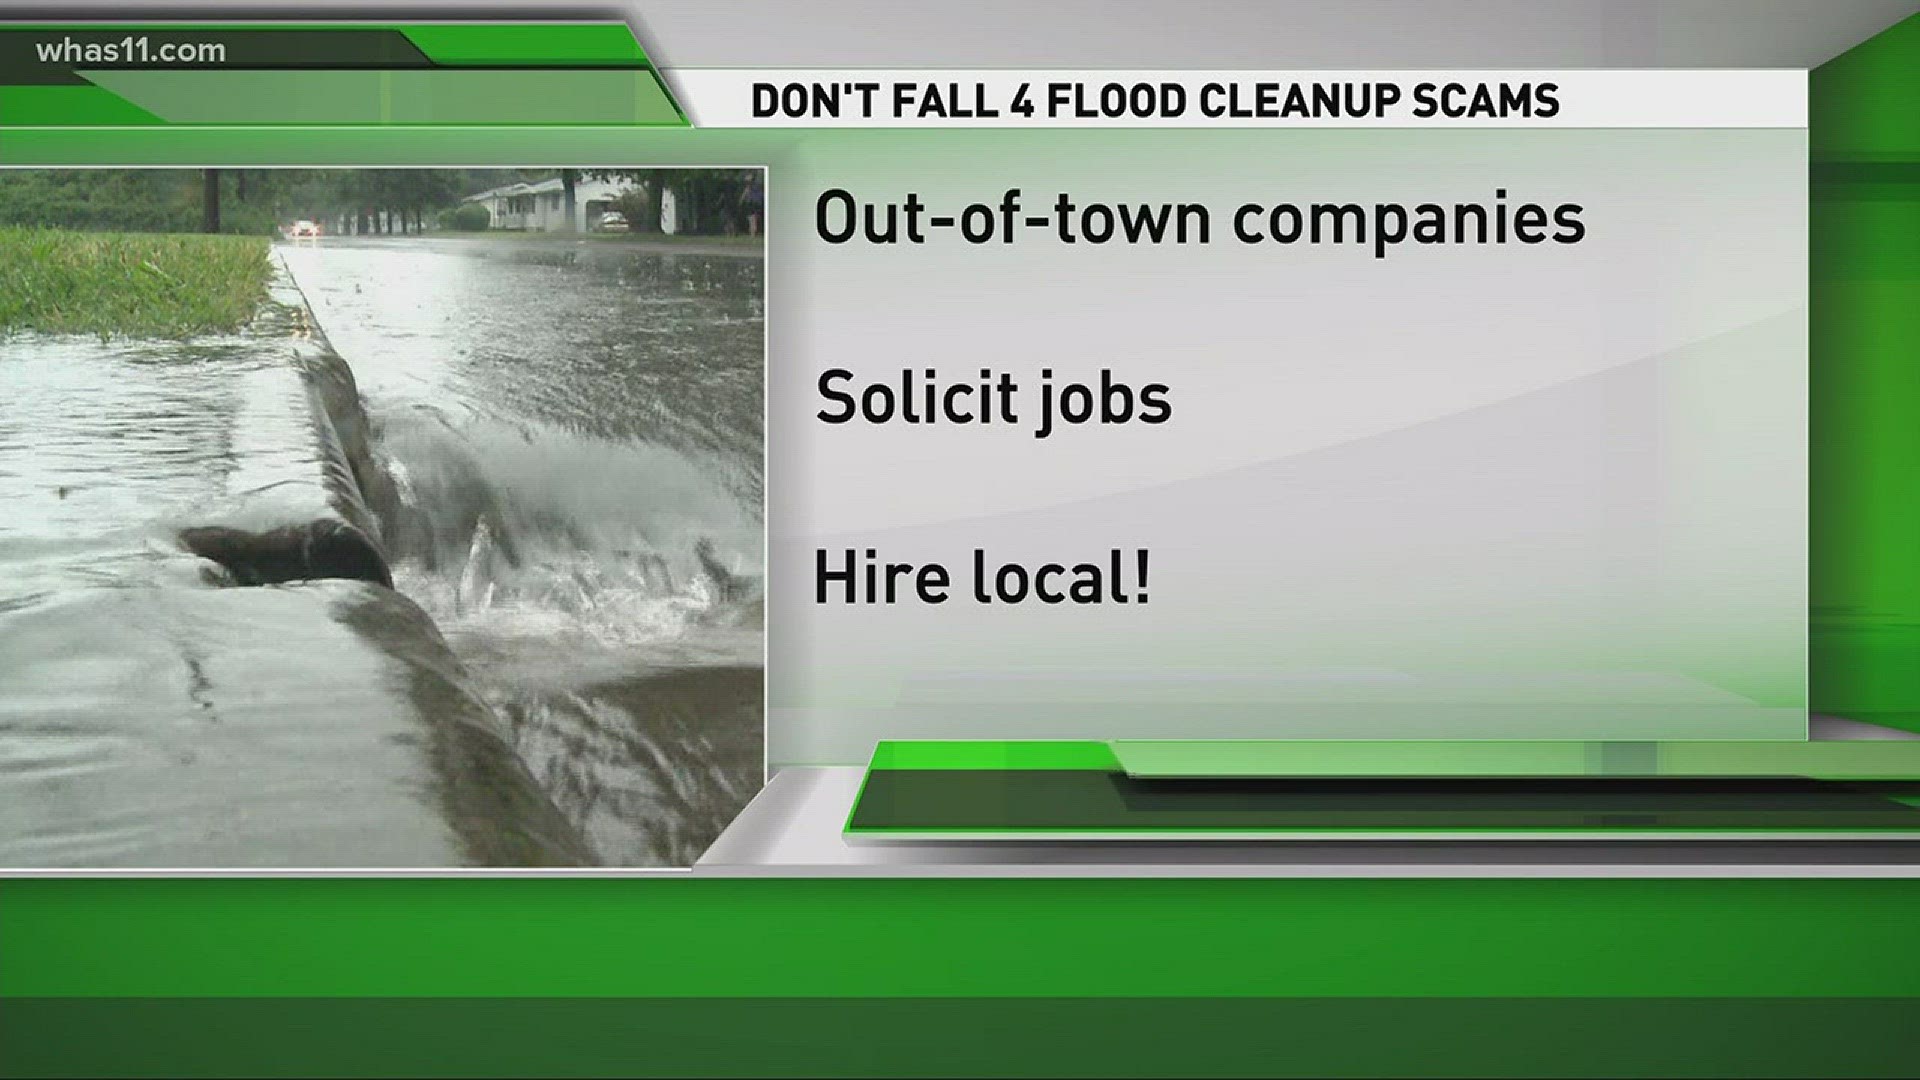 Don't Fall 4 It: Flood clean-up scam, Facebook quiz scams, and more